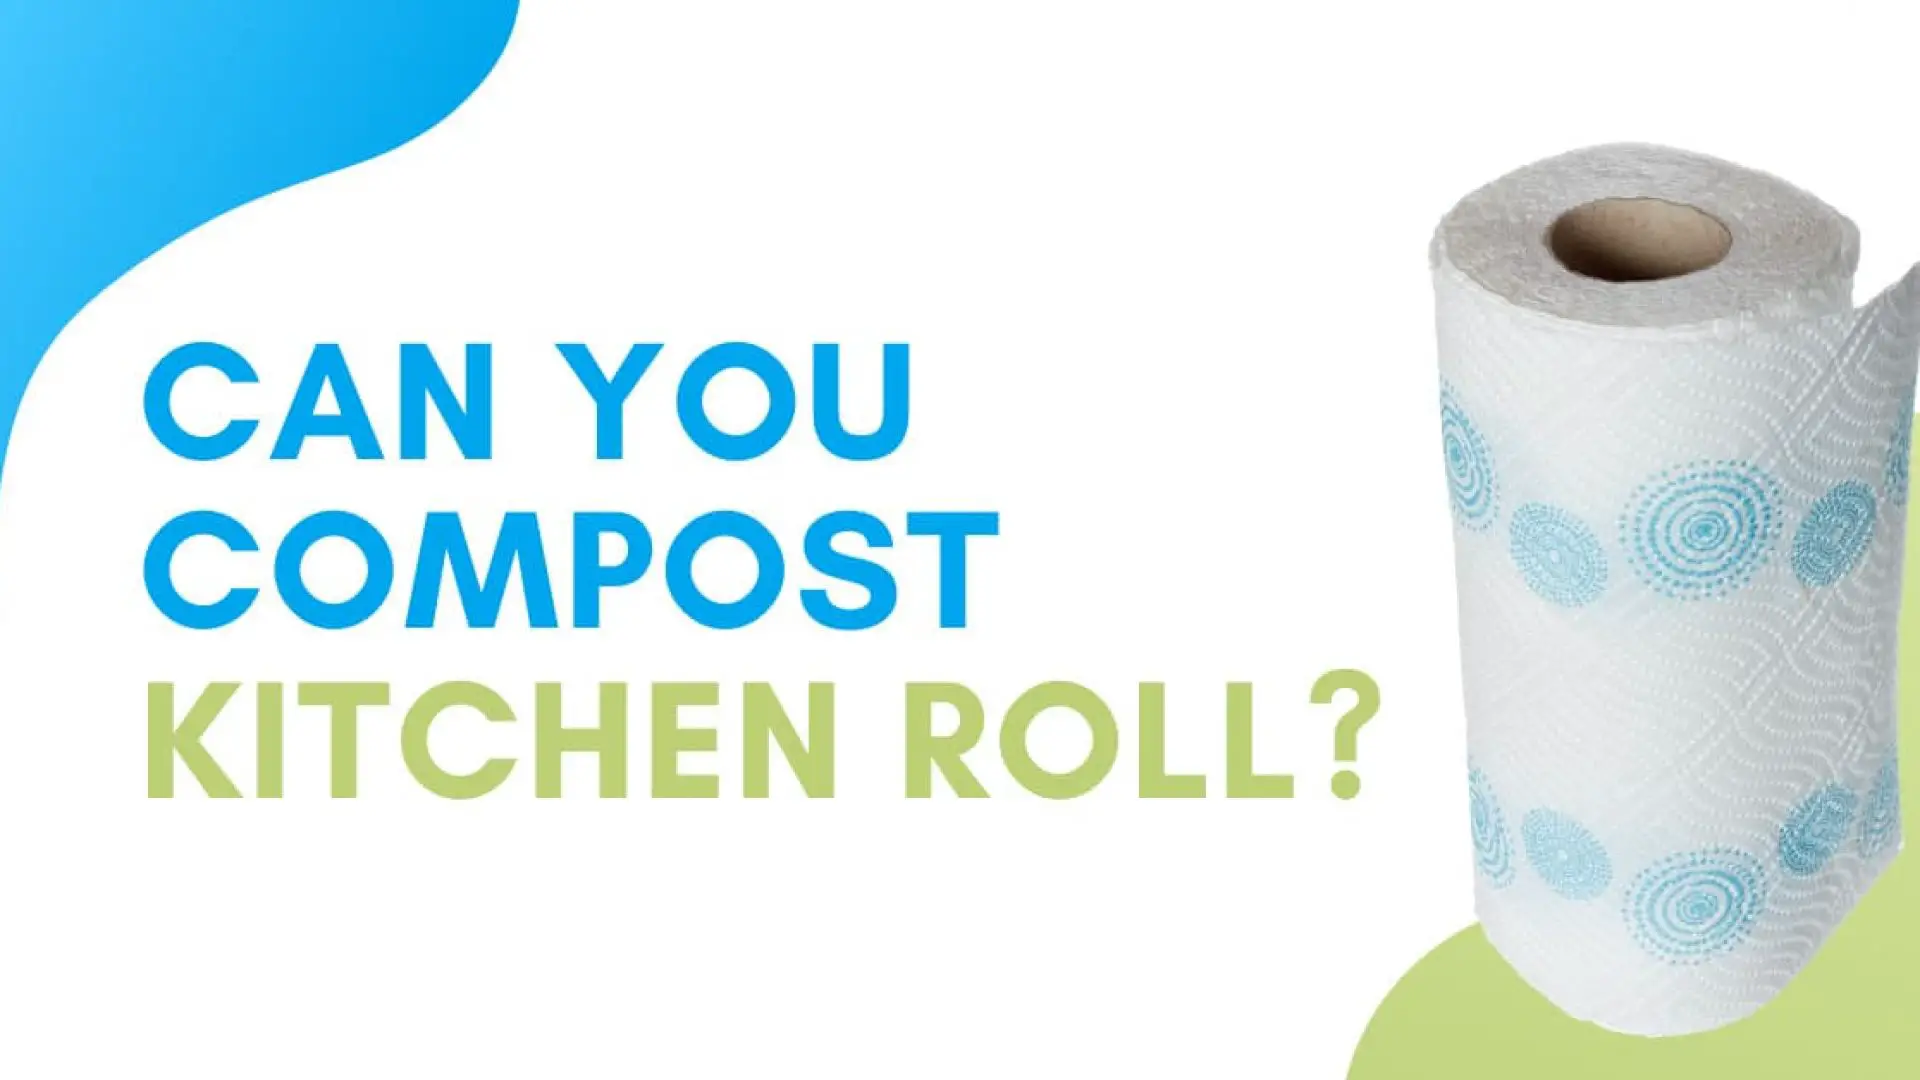 Can You Compost Kitchen Roll?